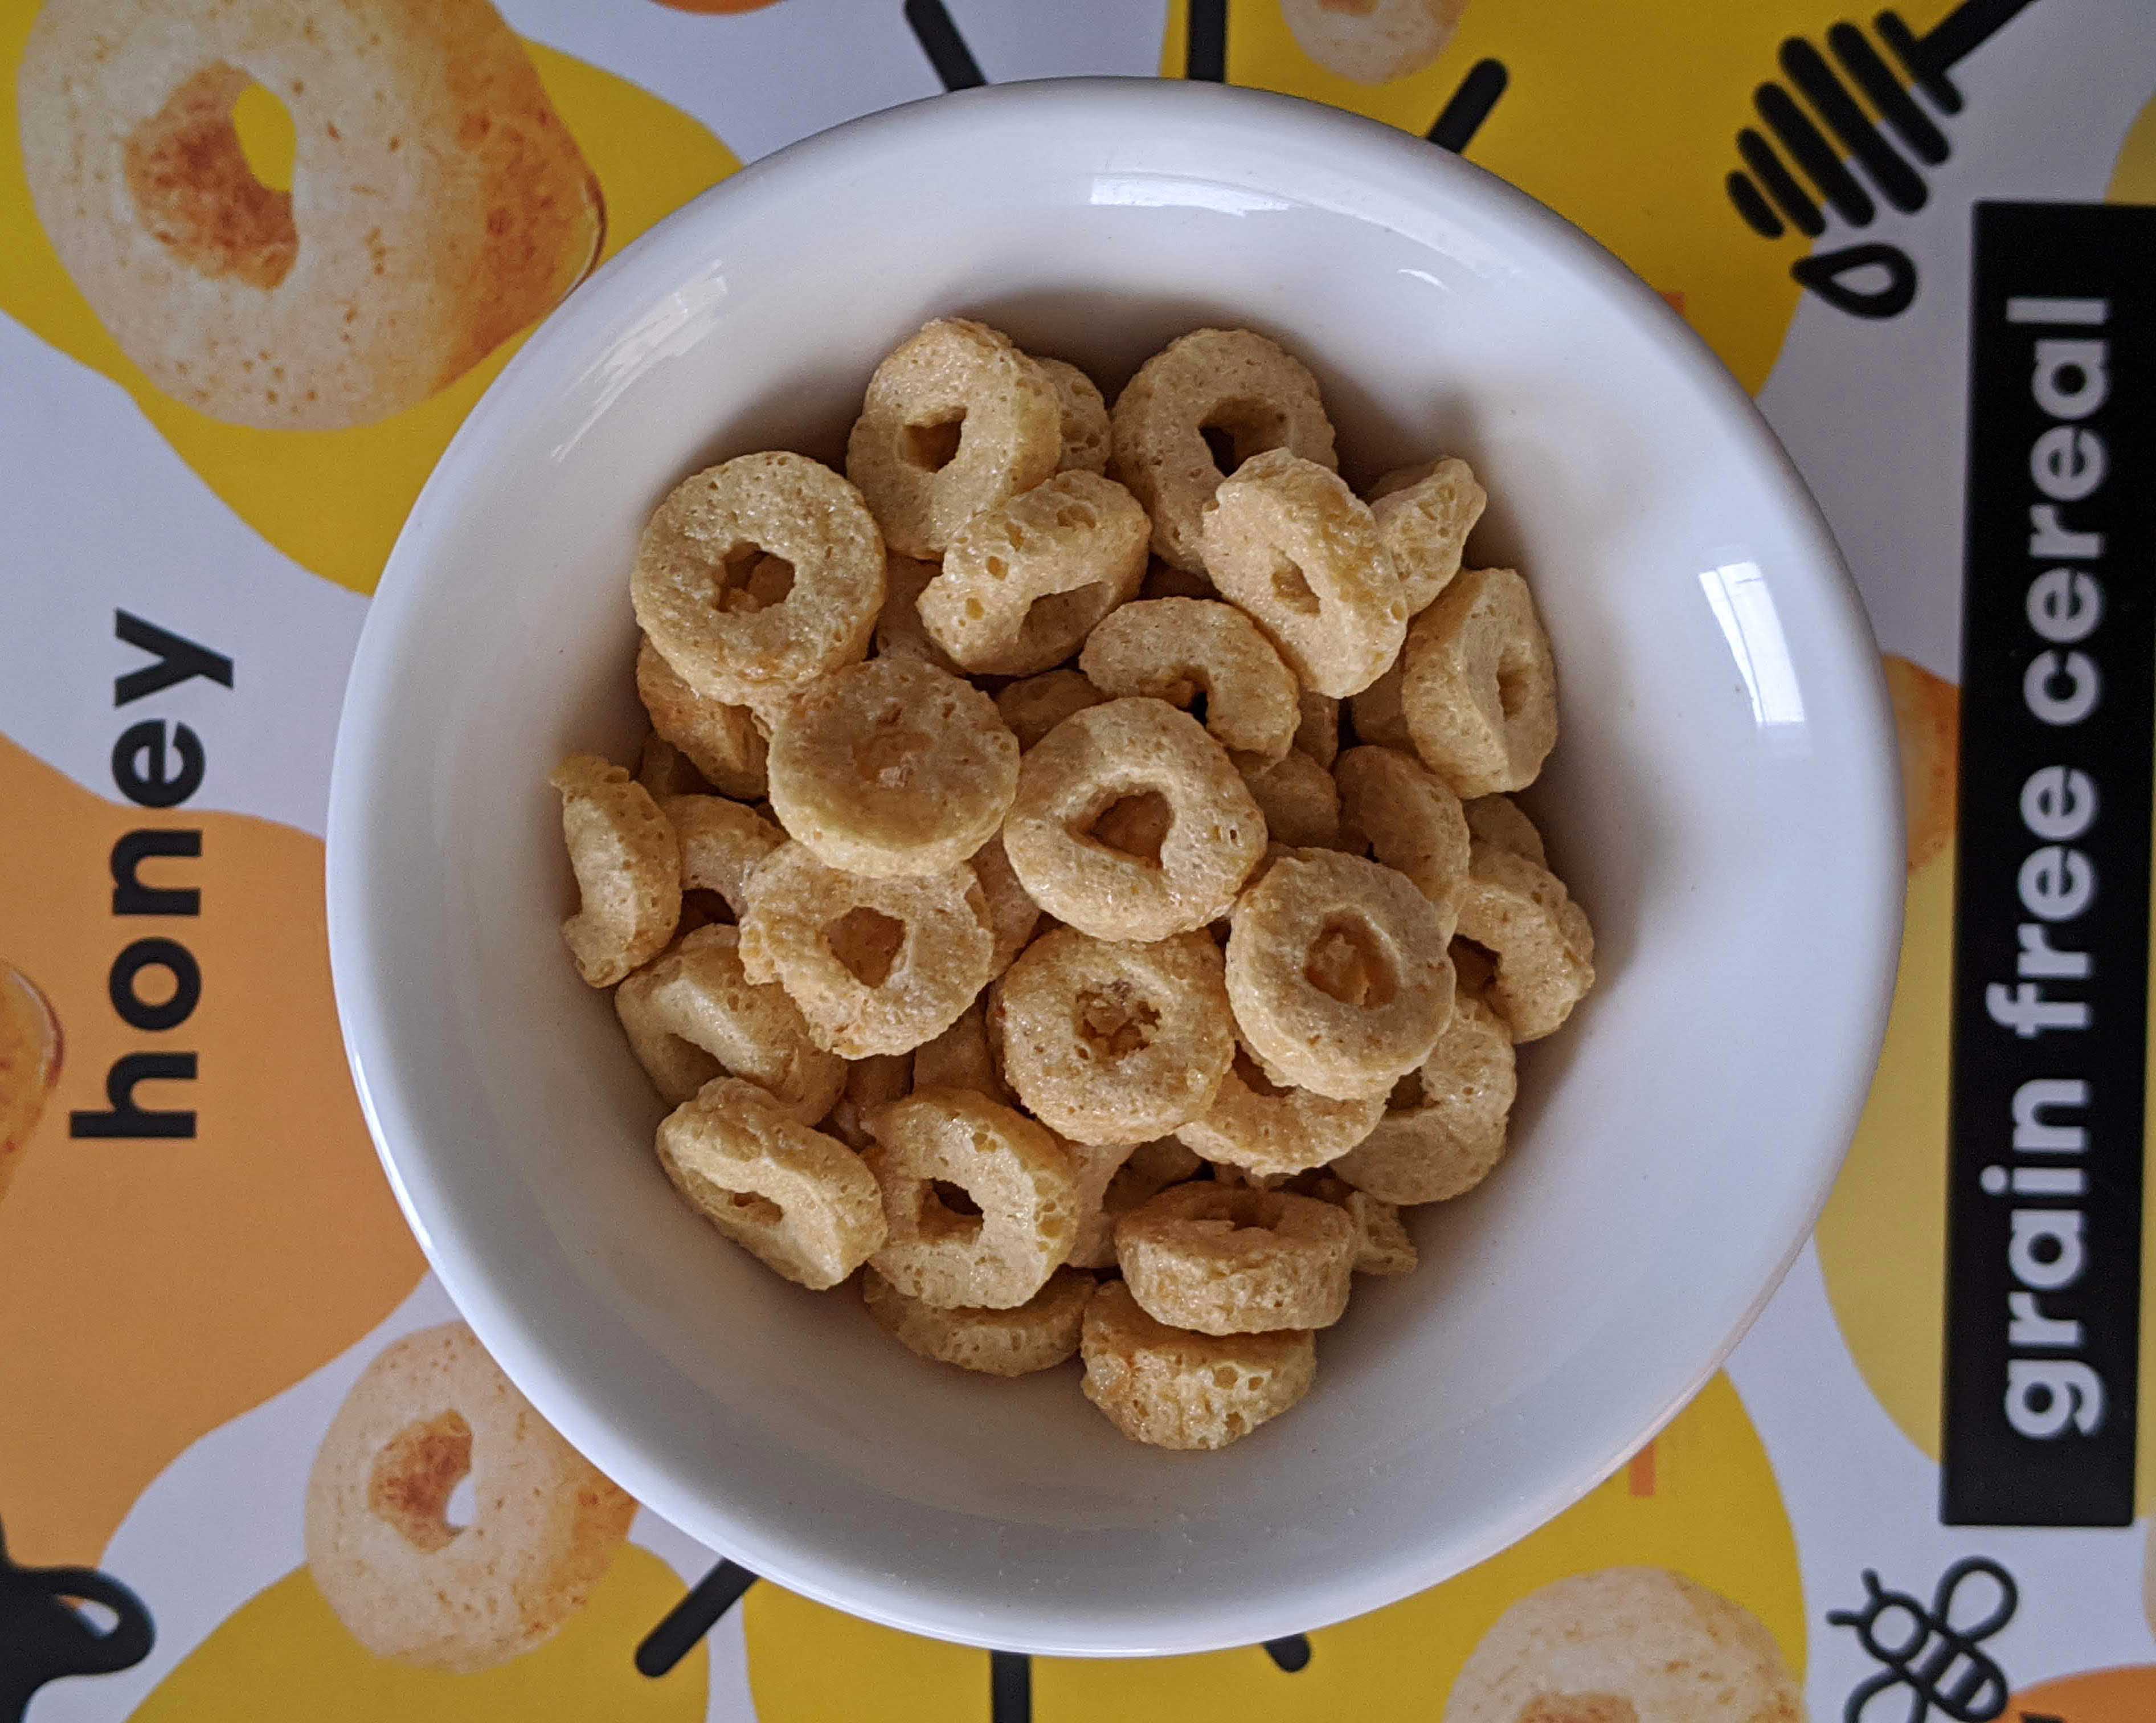 Three Wishes Cereal - High Protein, Low Sugar, Grain Free